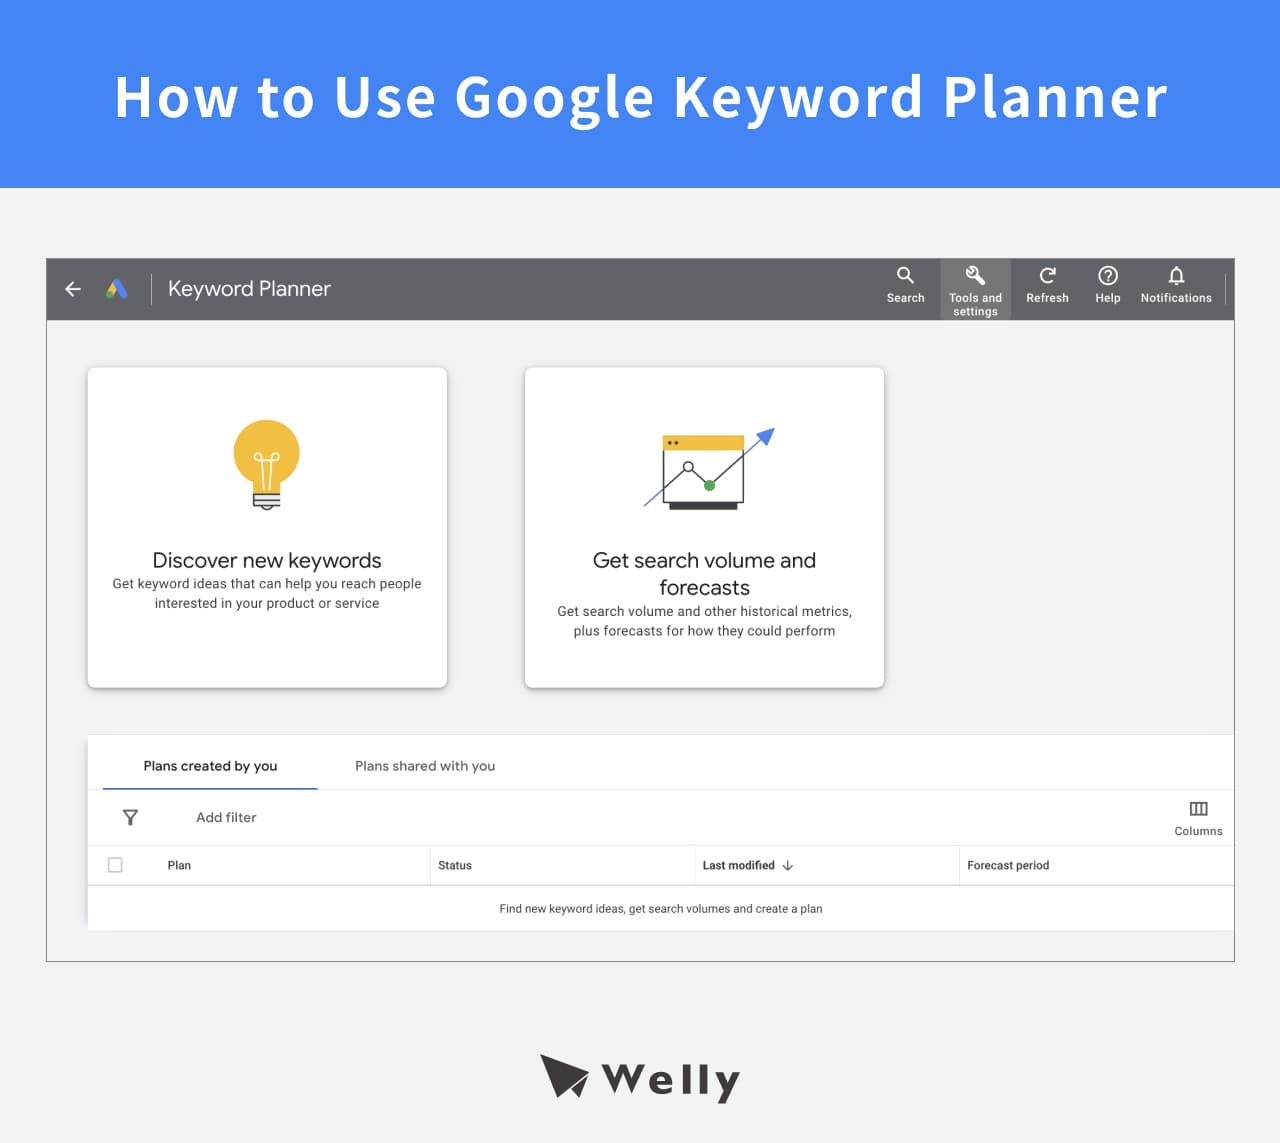 How to Use Google Keyword Planner